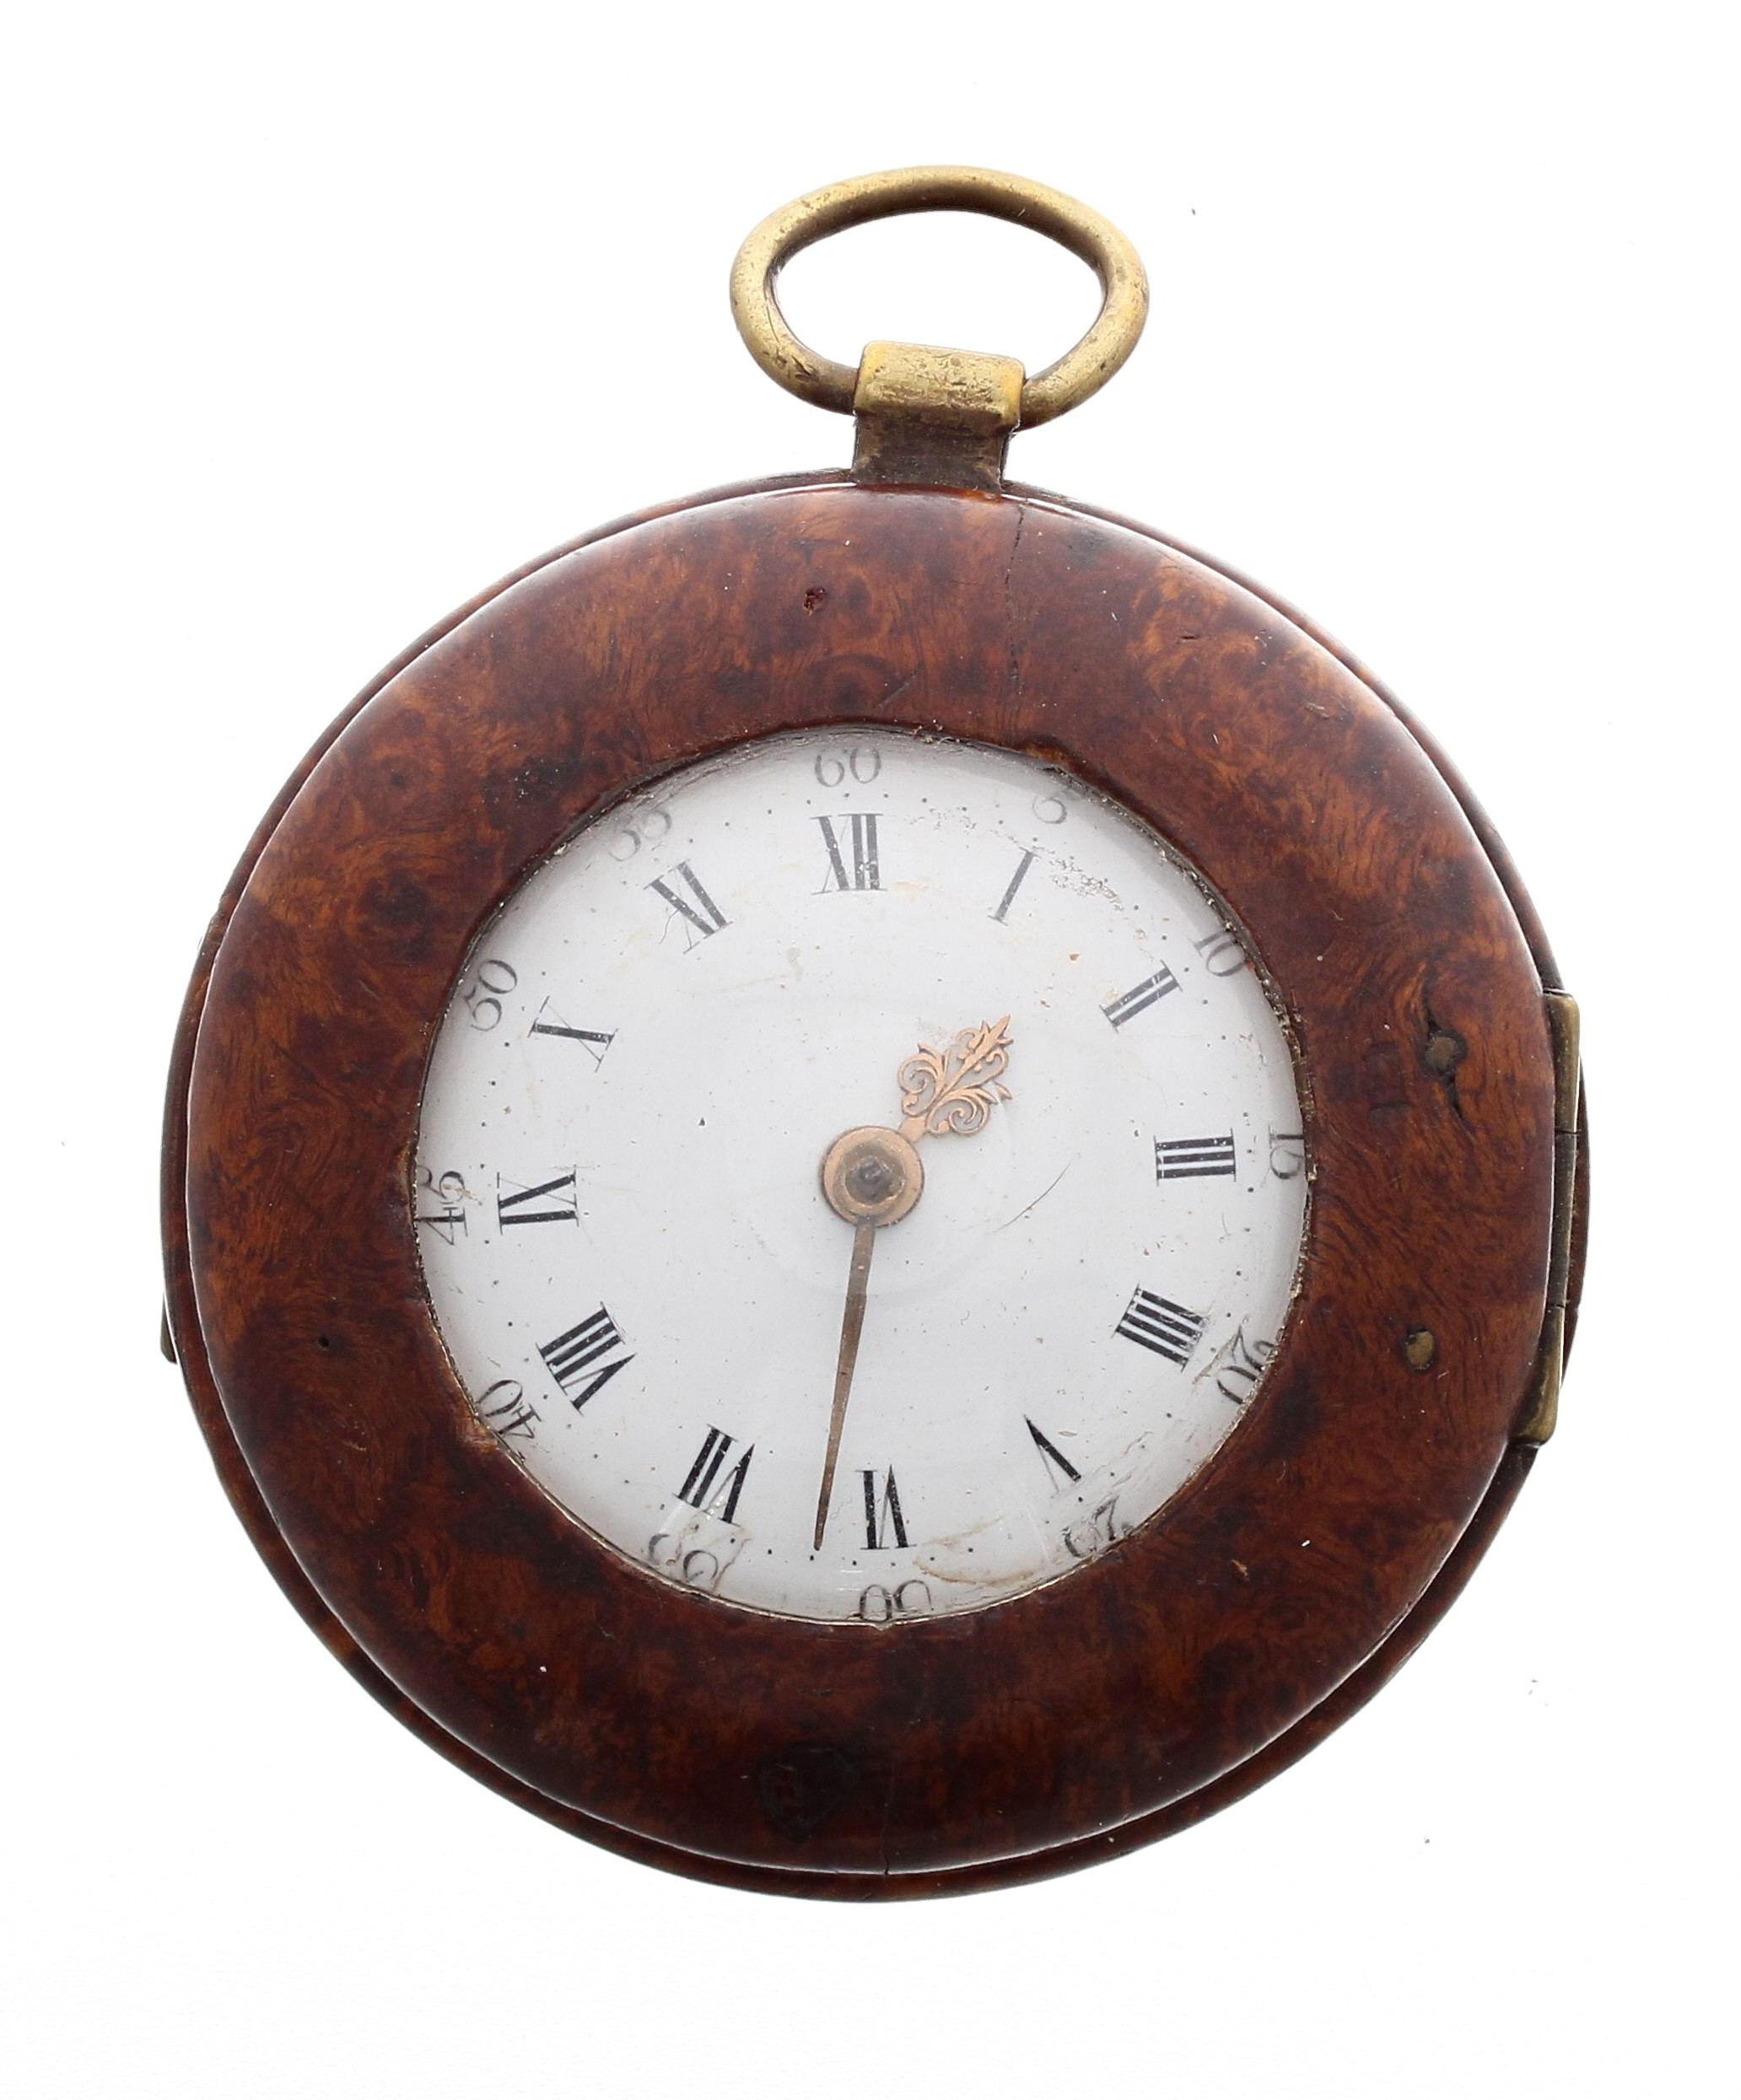 Thos. Power, St Alban - unusual English 18th century verge burr wood cased pocket watch, the fusee - Image 2 of 5